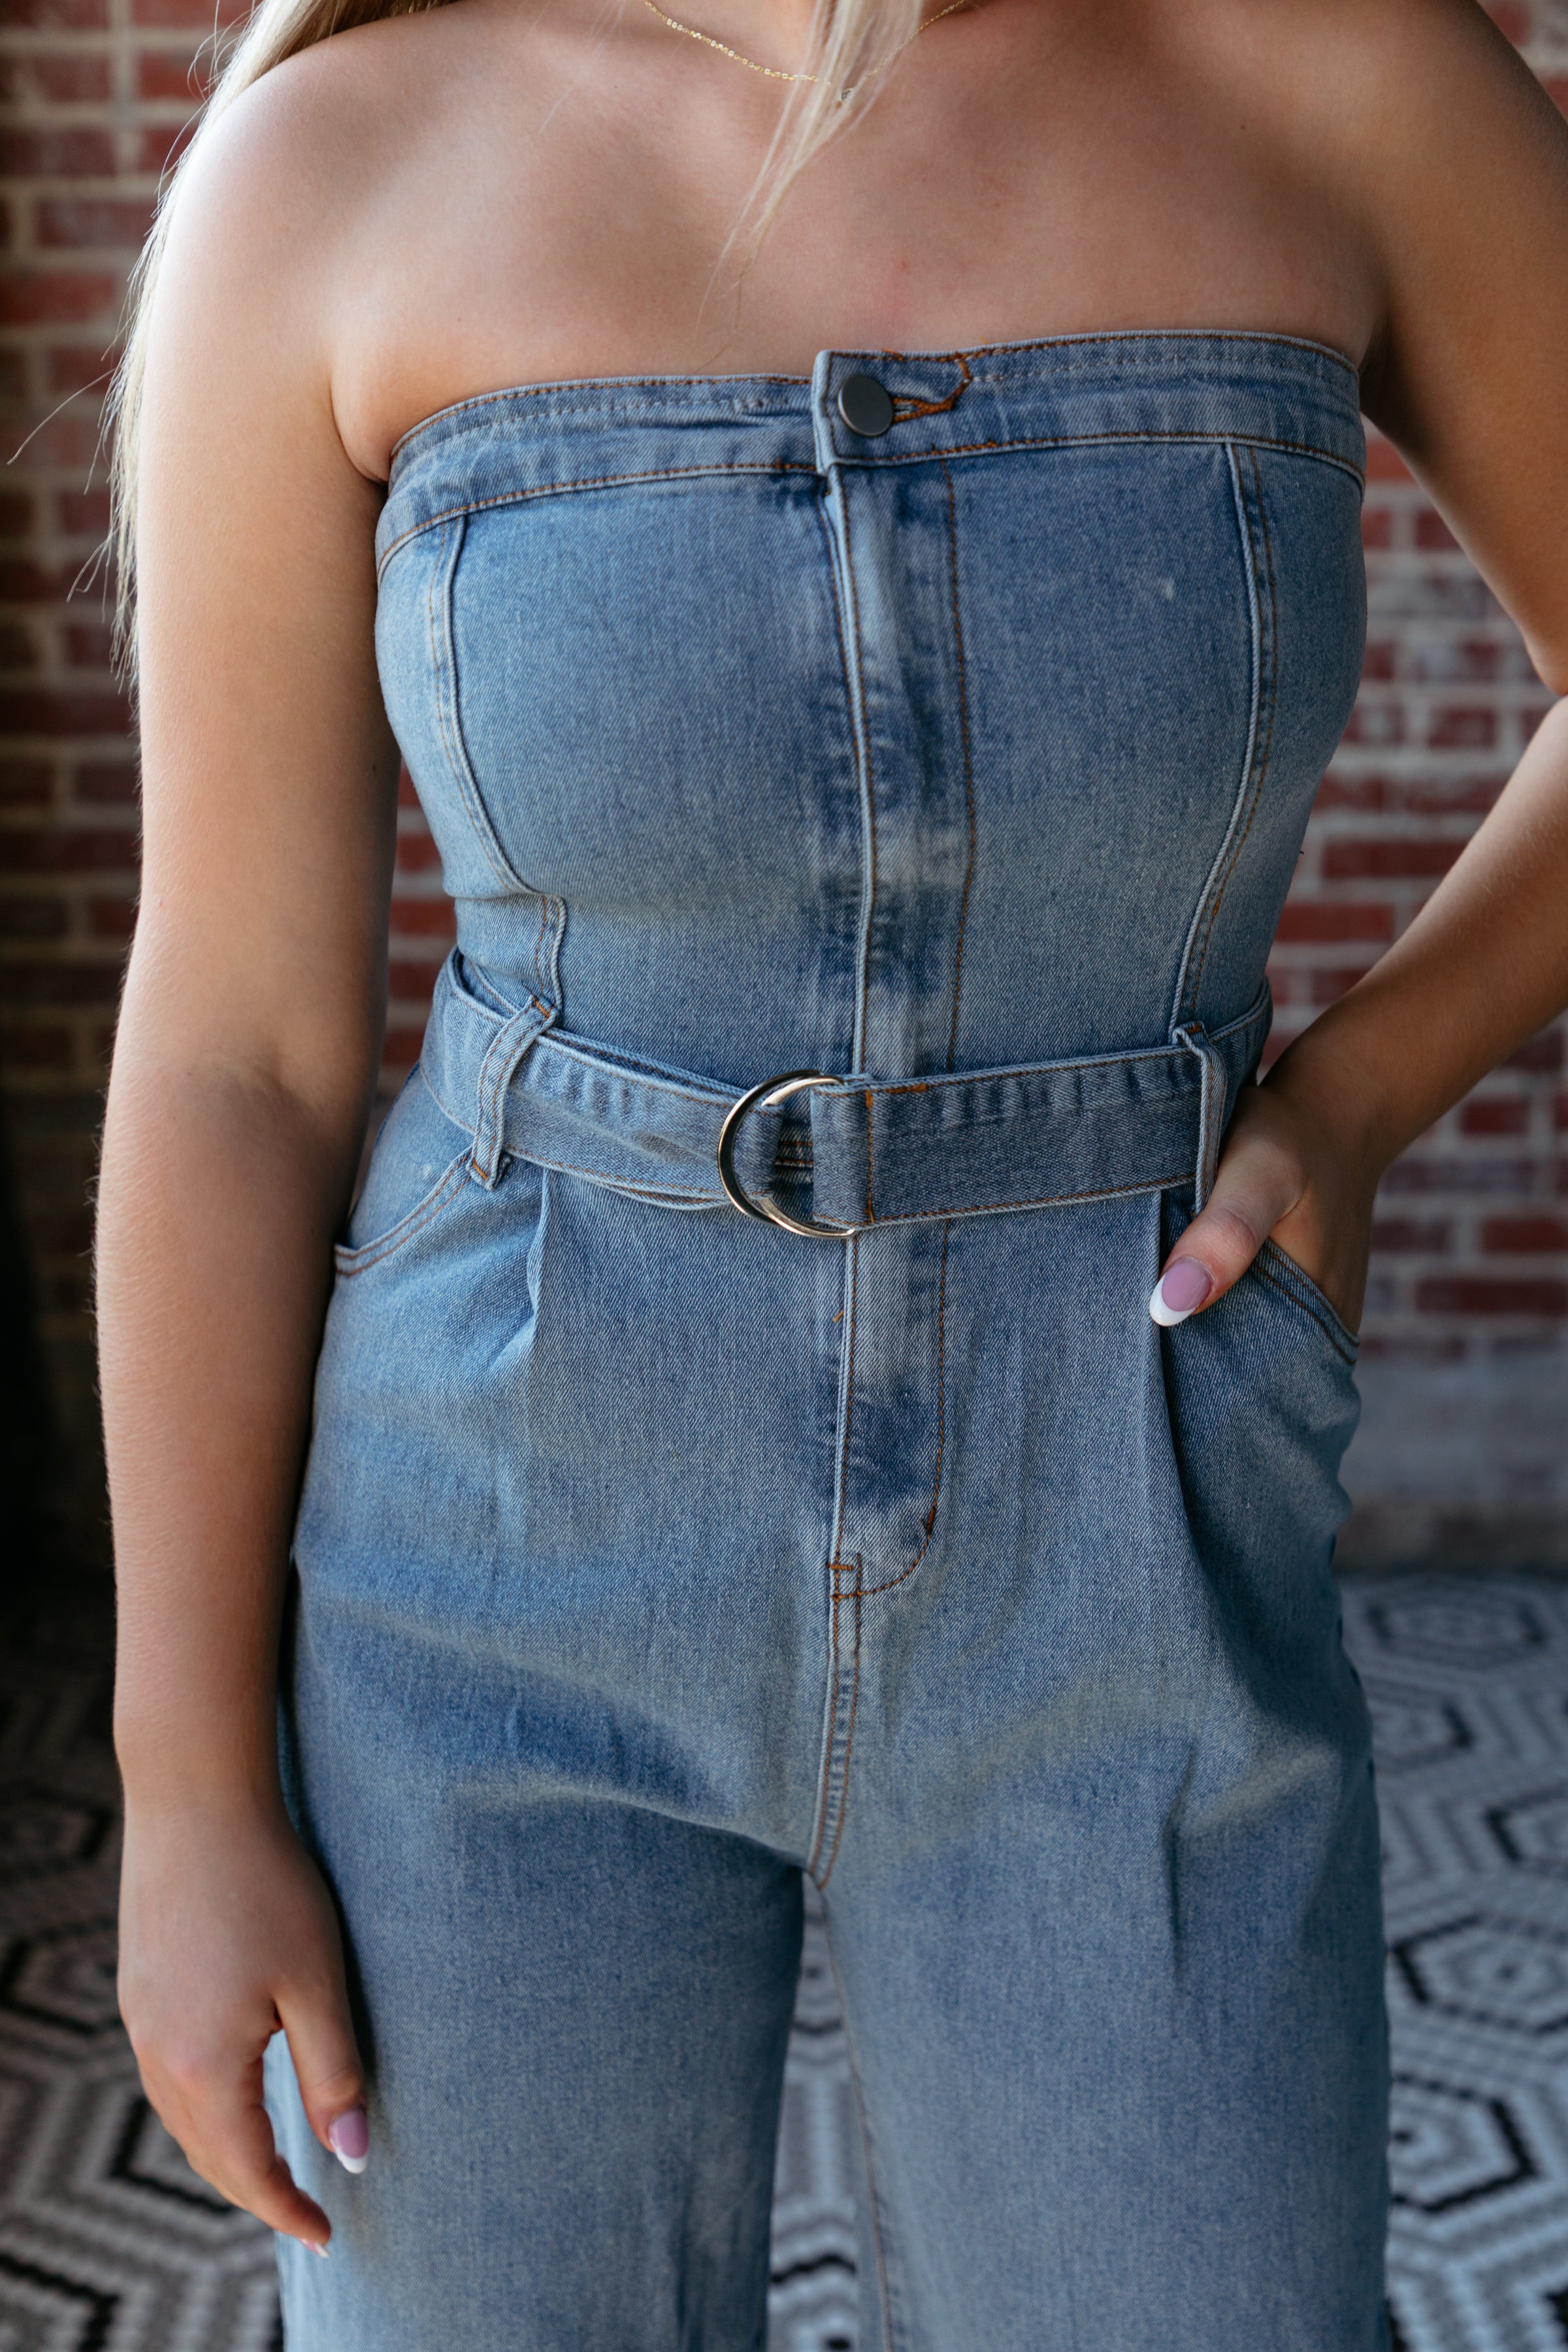 Womens Jumpsuits & Rompers Chain Strap Sleeveless Denim Jumpsuit Shorts Romper  Playsuit For Women Sexy Strapless Off Shoulder Zipper Jeans From Tutucloth,  $44.19 | DHgate.Com